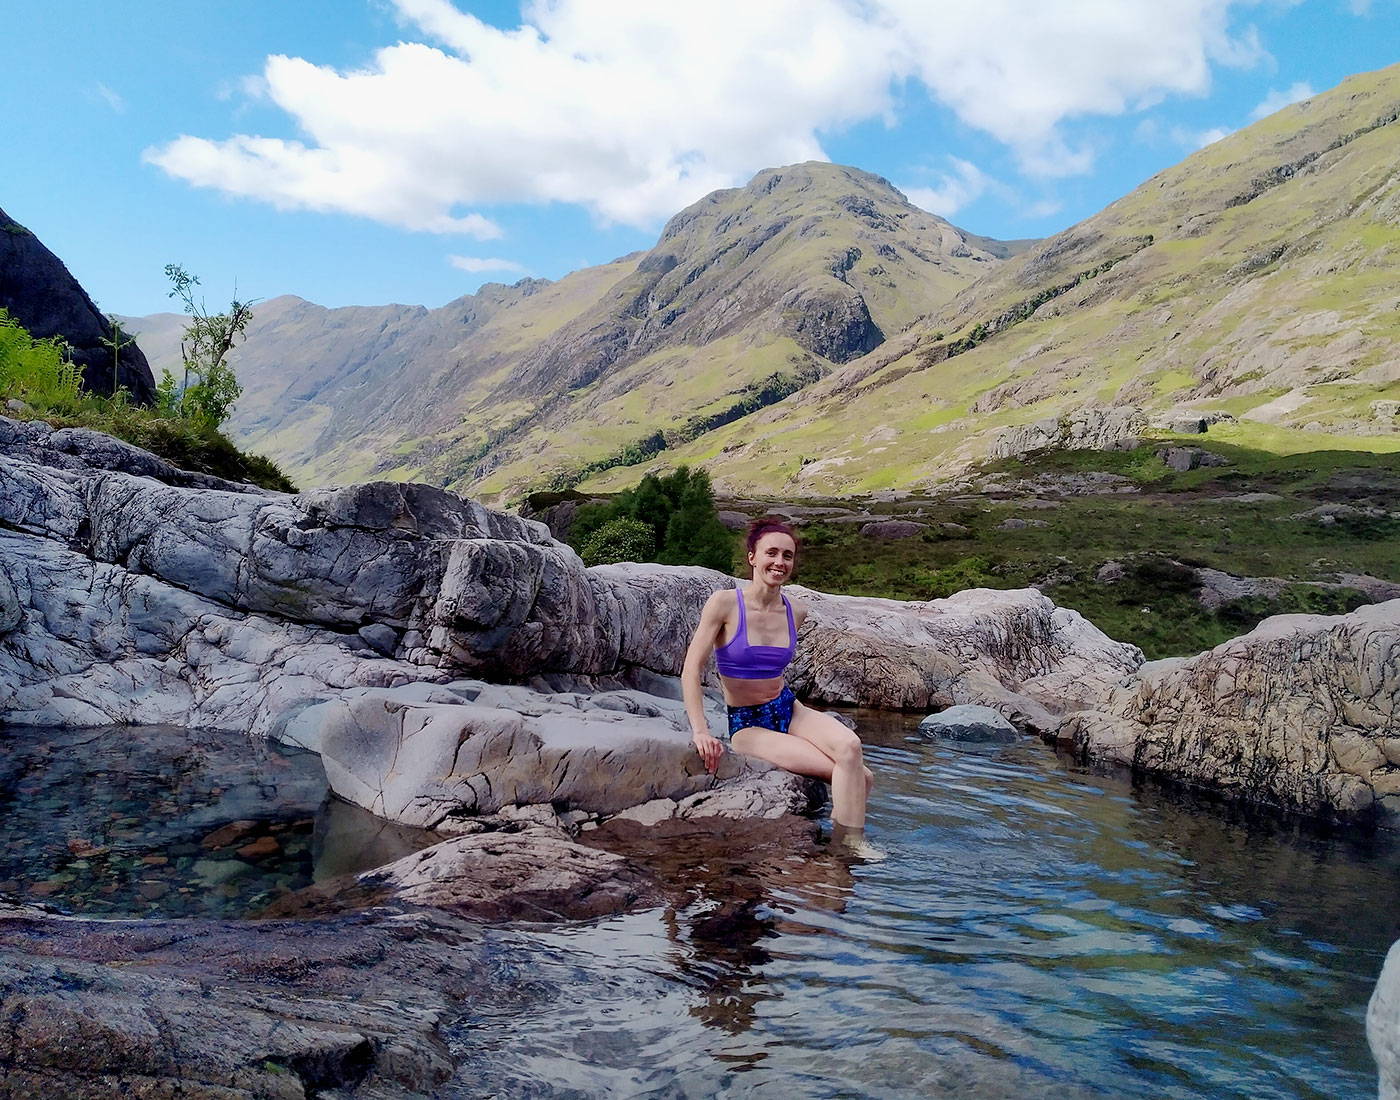 3RD ROCK Ambassador Holly Rees showing off an amazing wild swimming spot in tthe UK.